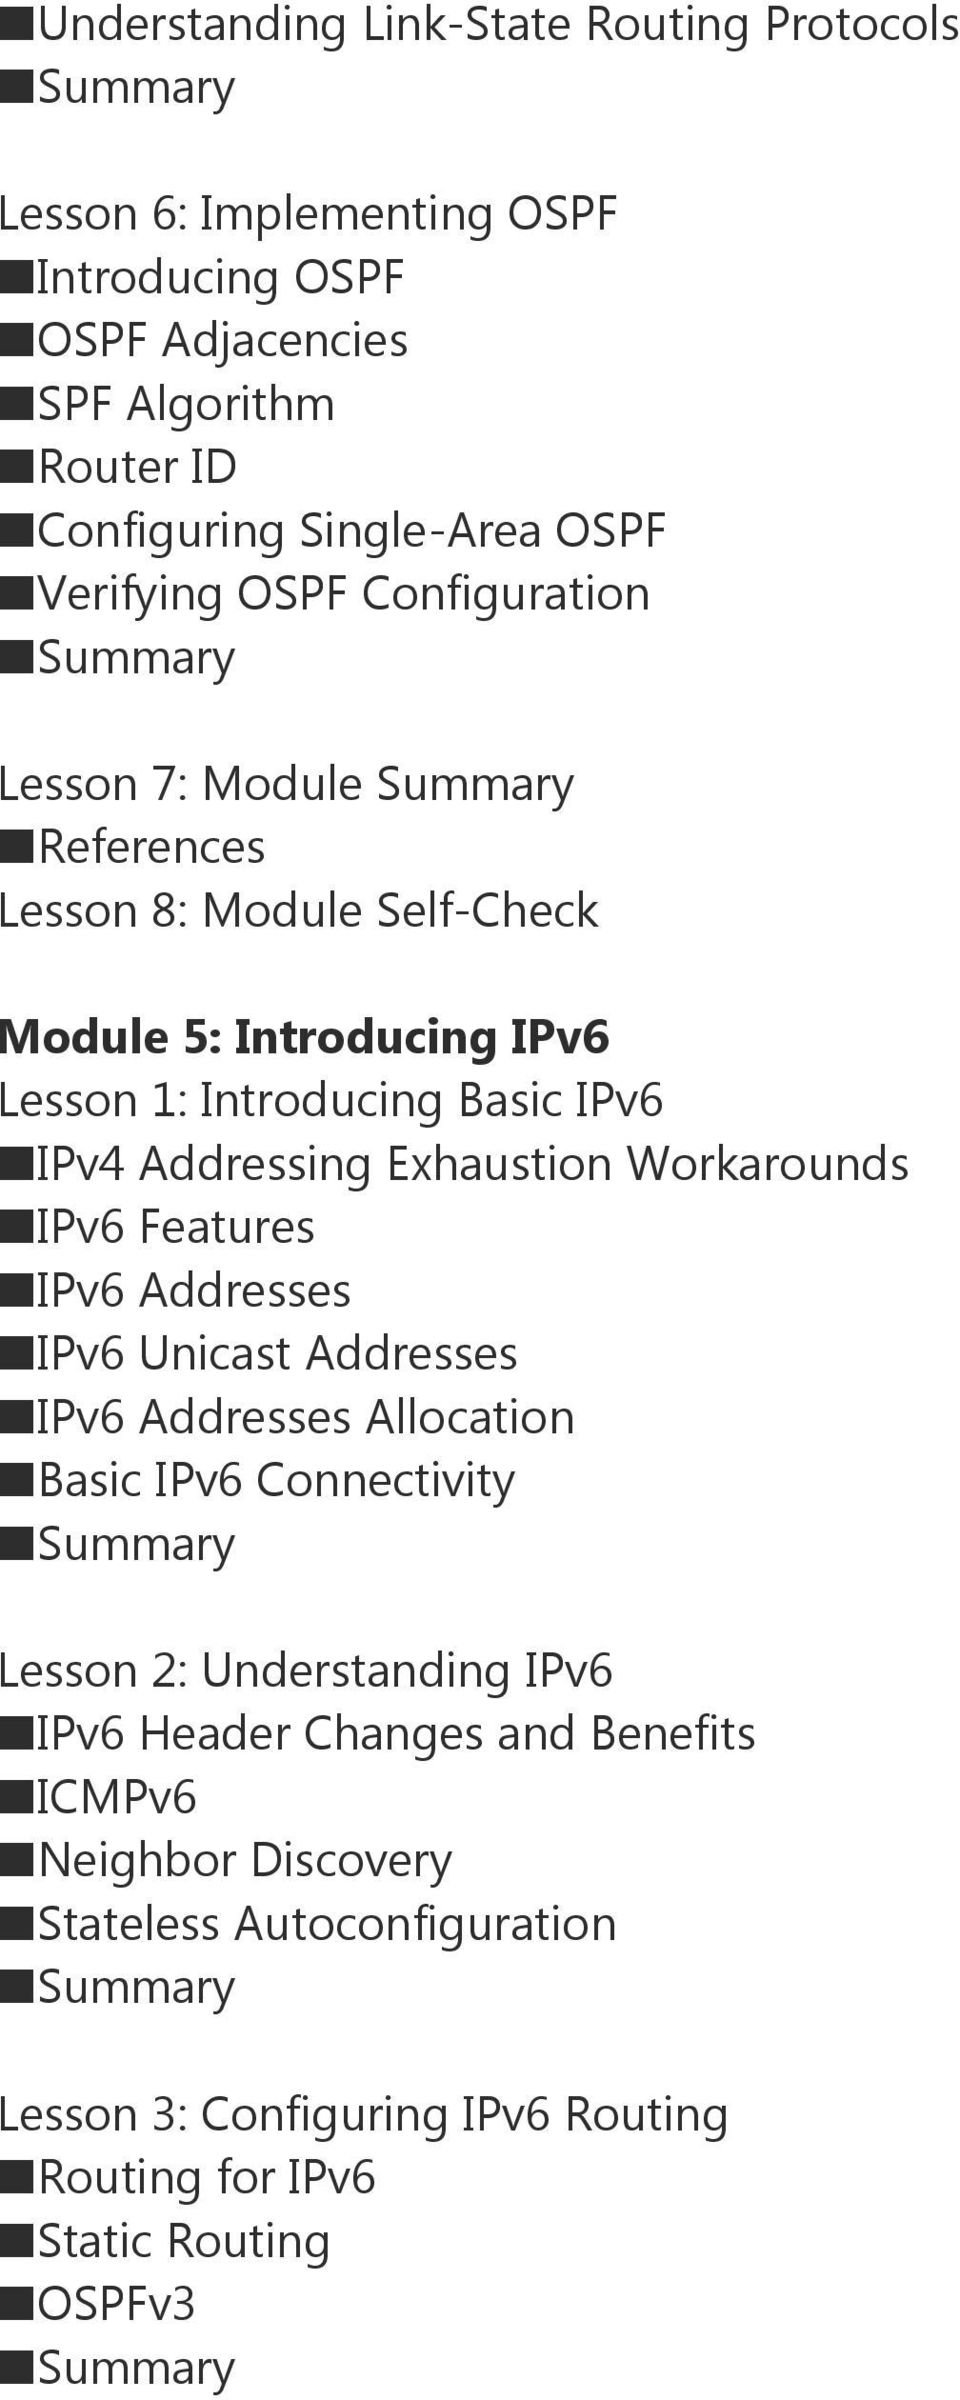 Addressing Exhaustion Workarounds IPv6 Features IPv6 Addresses IPv6 Unicast Addresses IPv6 Addresses Allocation Basic IPv6 Connectivity Lesson 2: Understanding